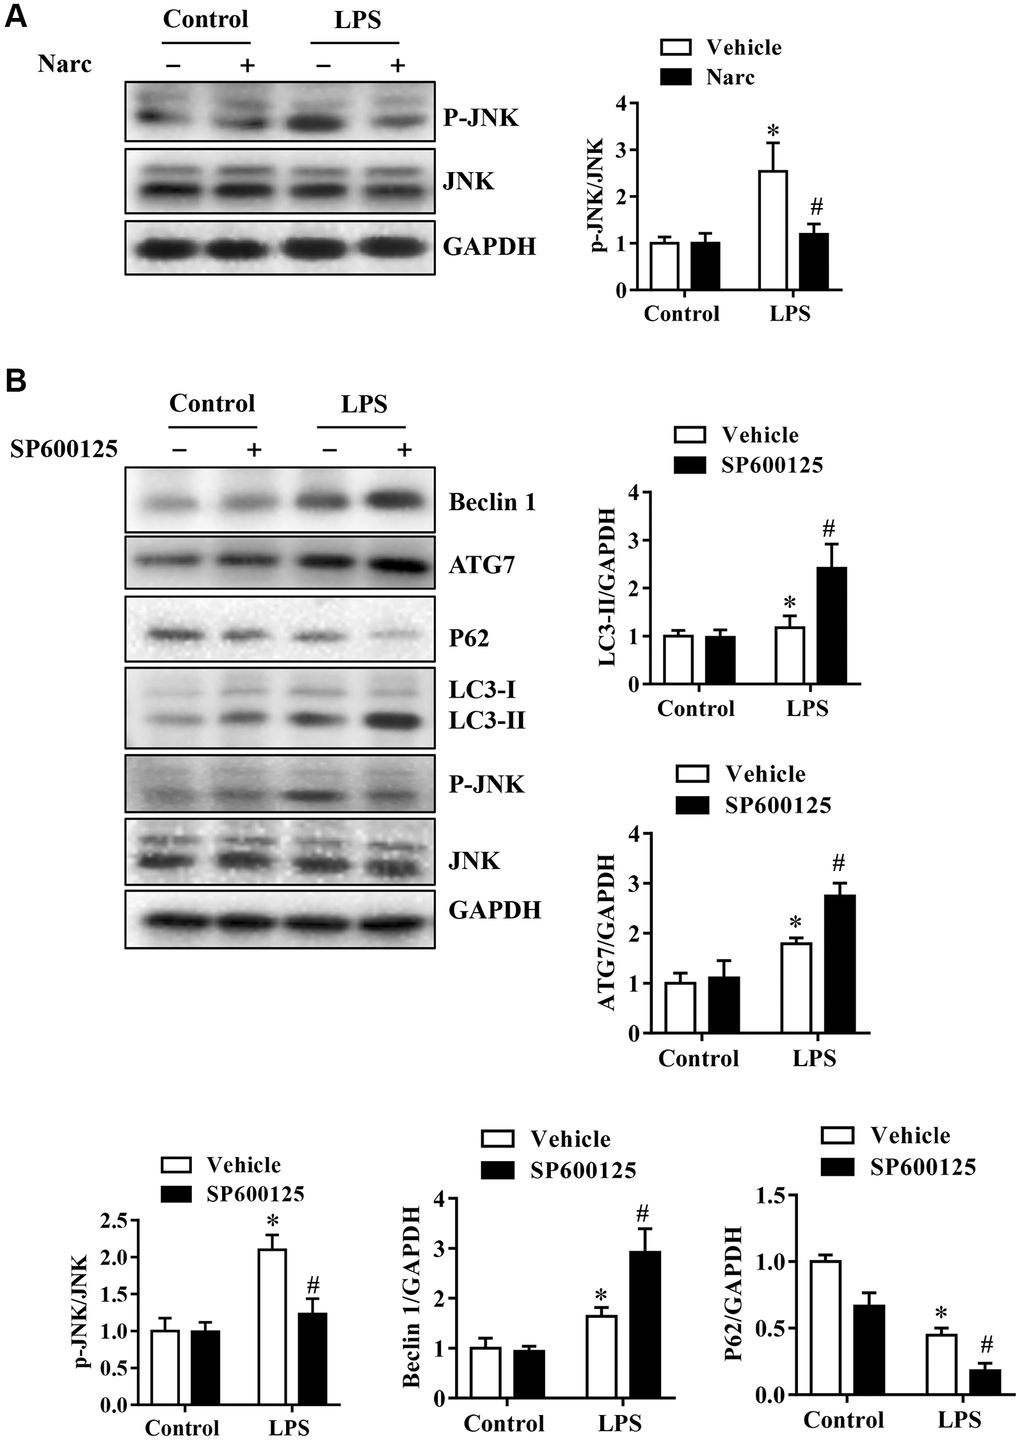 Narciclasine-induced autophagy is associated with JNK activity in cardiomyocytes. Neonatal rat cardiomyocytes were pretreated with narciclasine (300 nmol/L, 30 min) or SP600125 (SP, 20 μmol/L, 30 min) before LPS challenge. (A) JNK activity in the presence or absence of narciclasine was measured by western blotting. (B) The levels of autophagy-associated proteins, p-JNK, and JNK were examined by western blotting. n = 3 per group. The data are shown as the means ± SEM. *P #P 